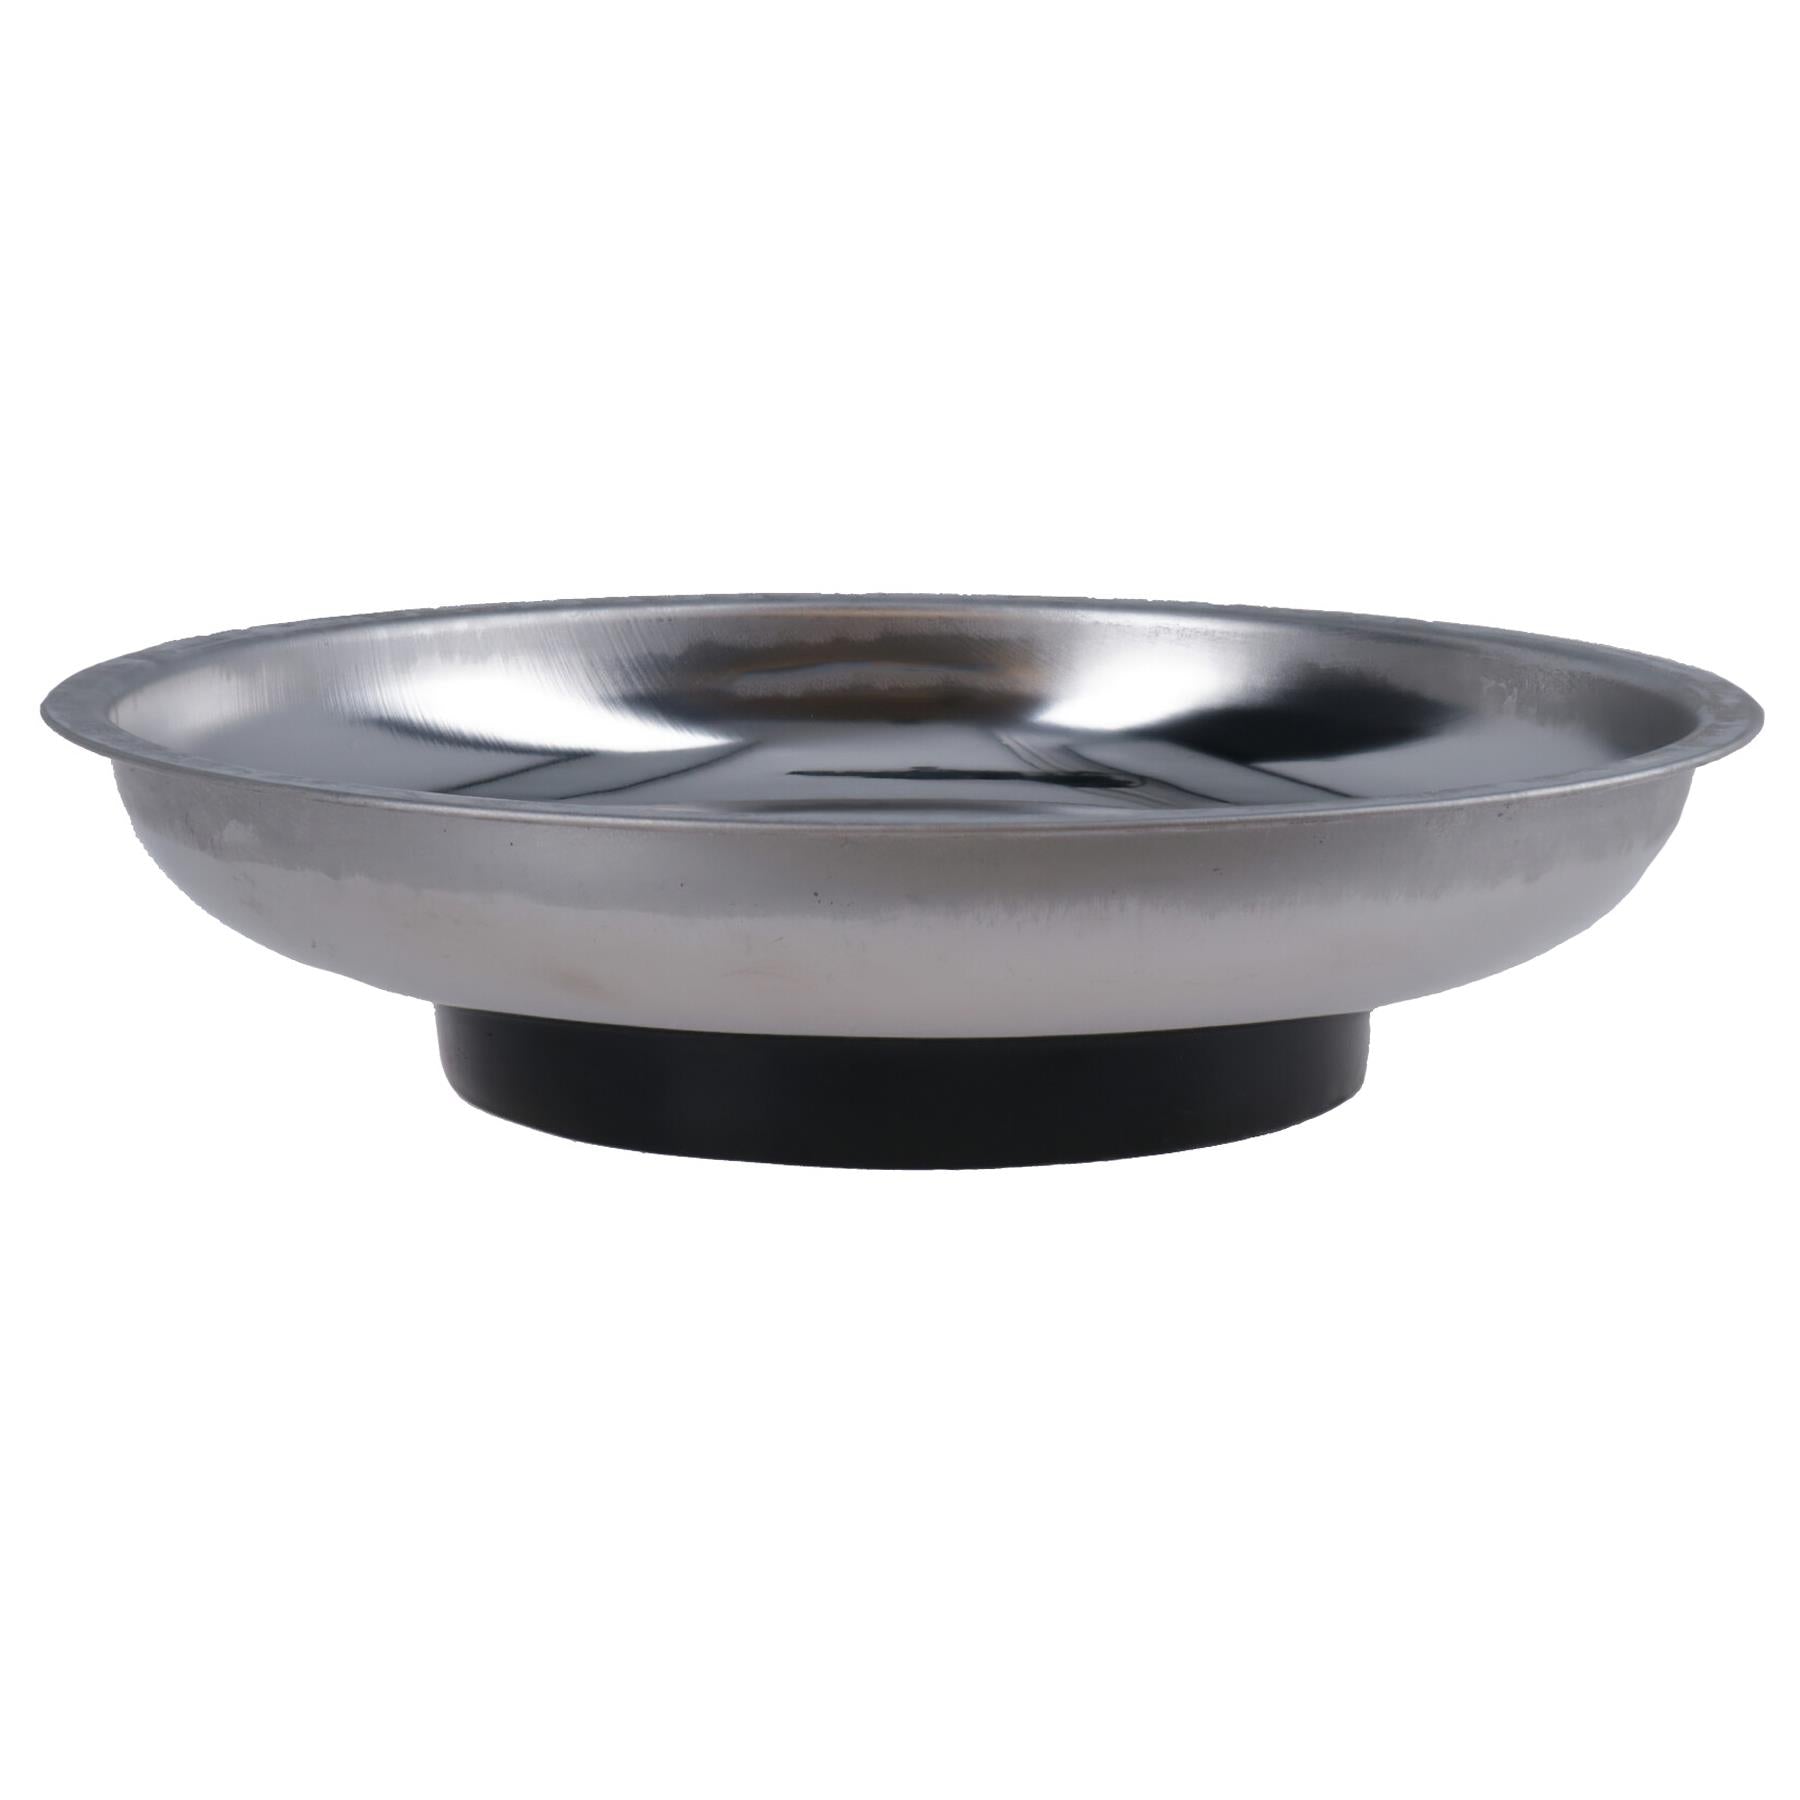 Magnetic Parts Tray Dish Storage Holder Circular Round Stainless Steel 6" TE037